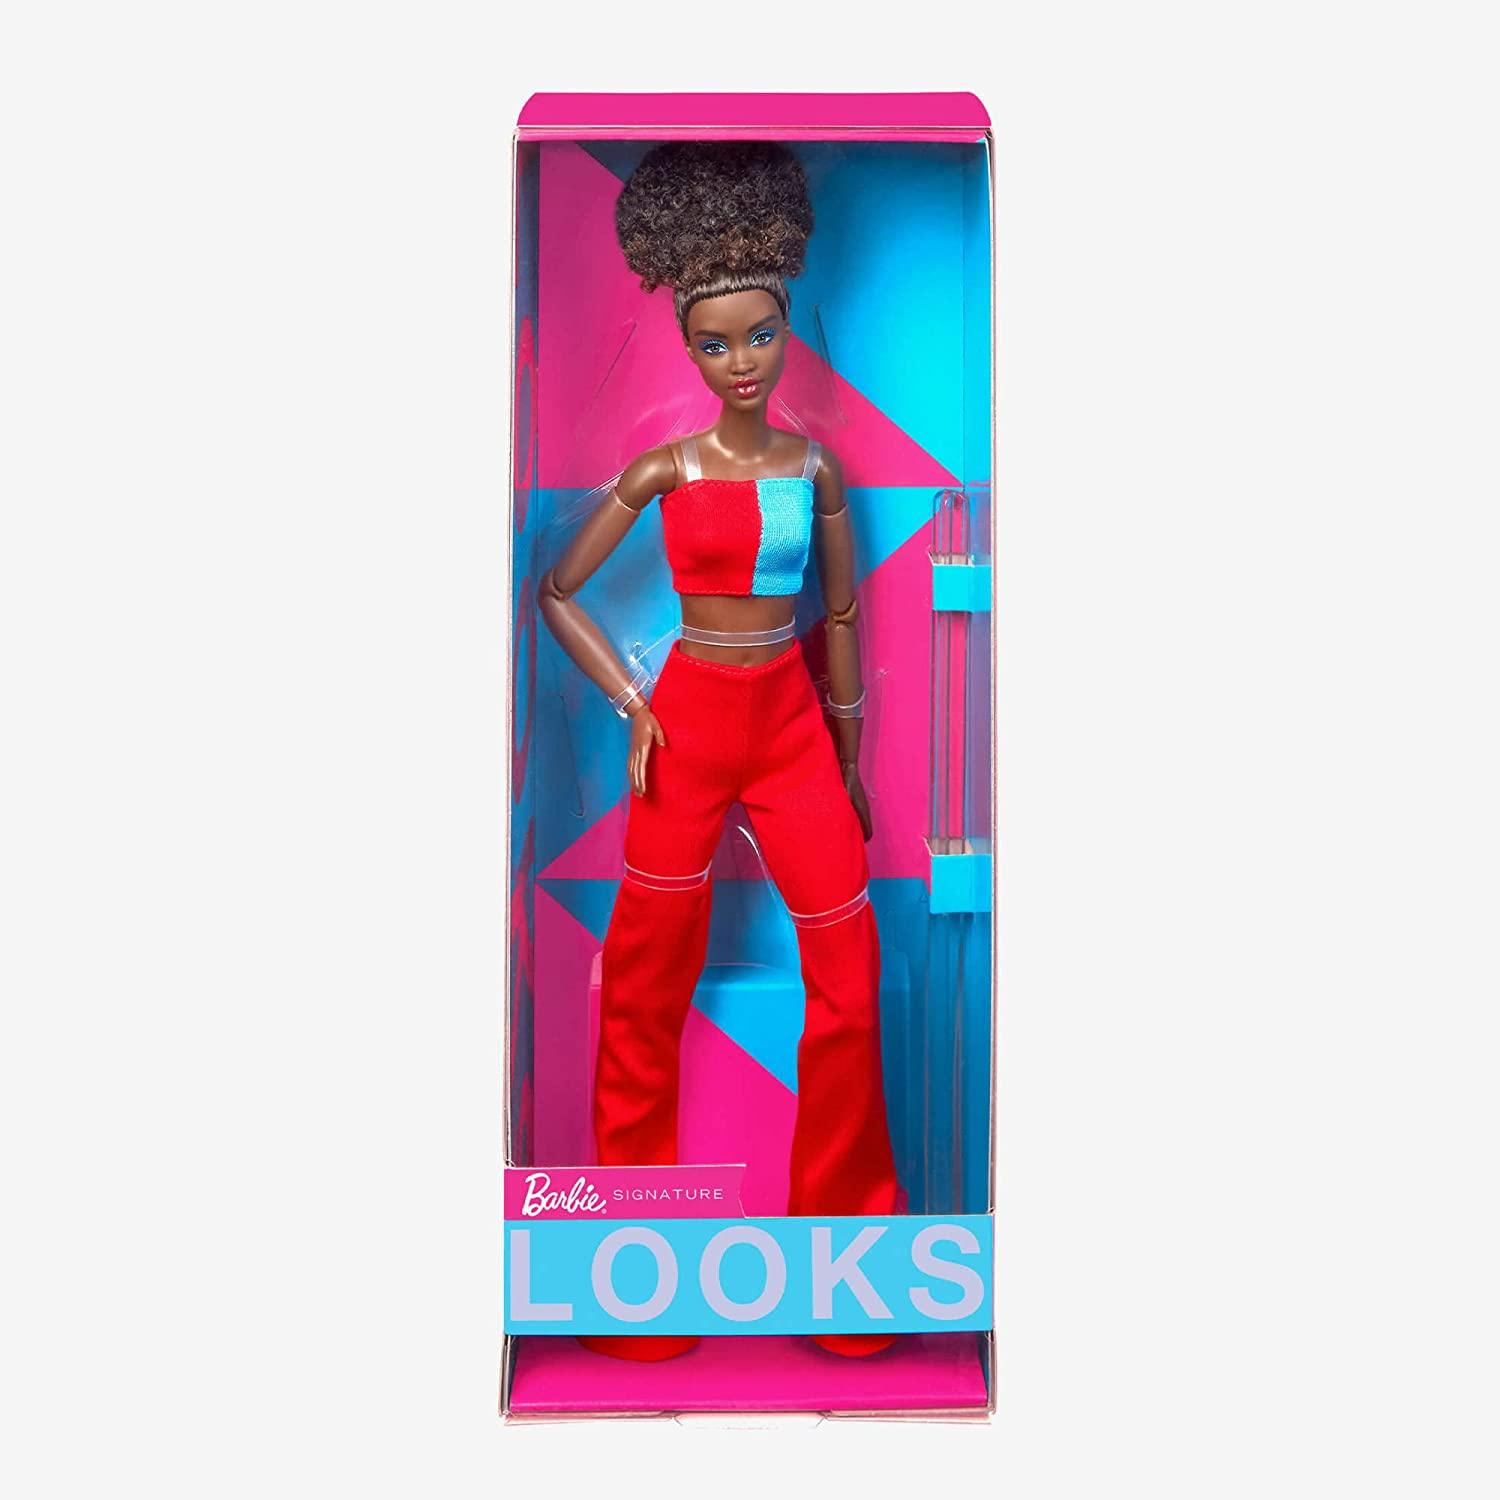 Barbie Looks Doll, Natural Black Hair, Color Block Outfit, Crop Top and Flare Pants, Style and Pose, Fashion Collectibles - BumbleToys - 5-7 Years, Barbie, Barbie Looks, Fashion Dolls & Accessories, Girls, Pre-Order